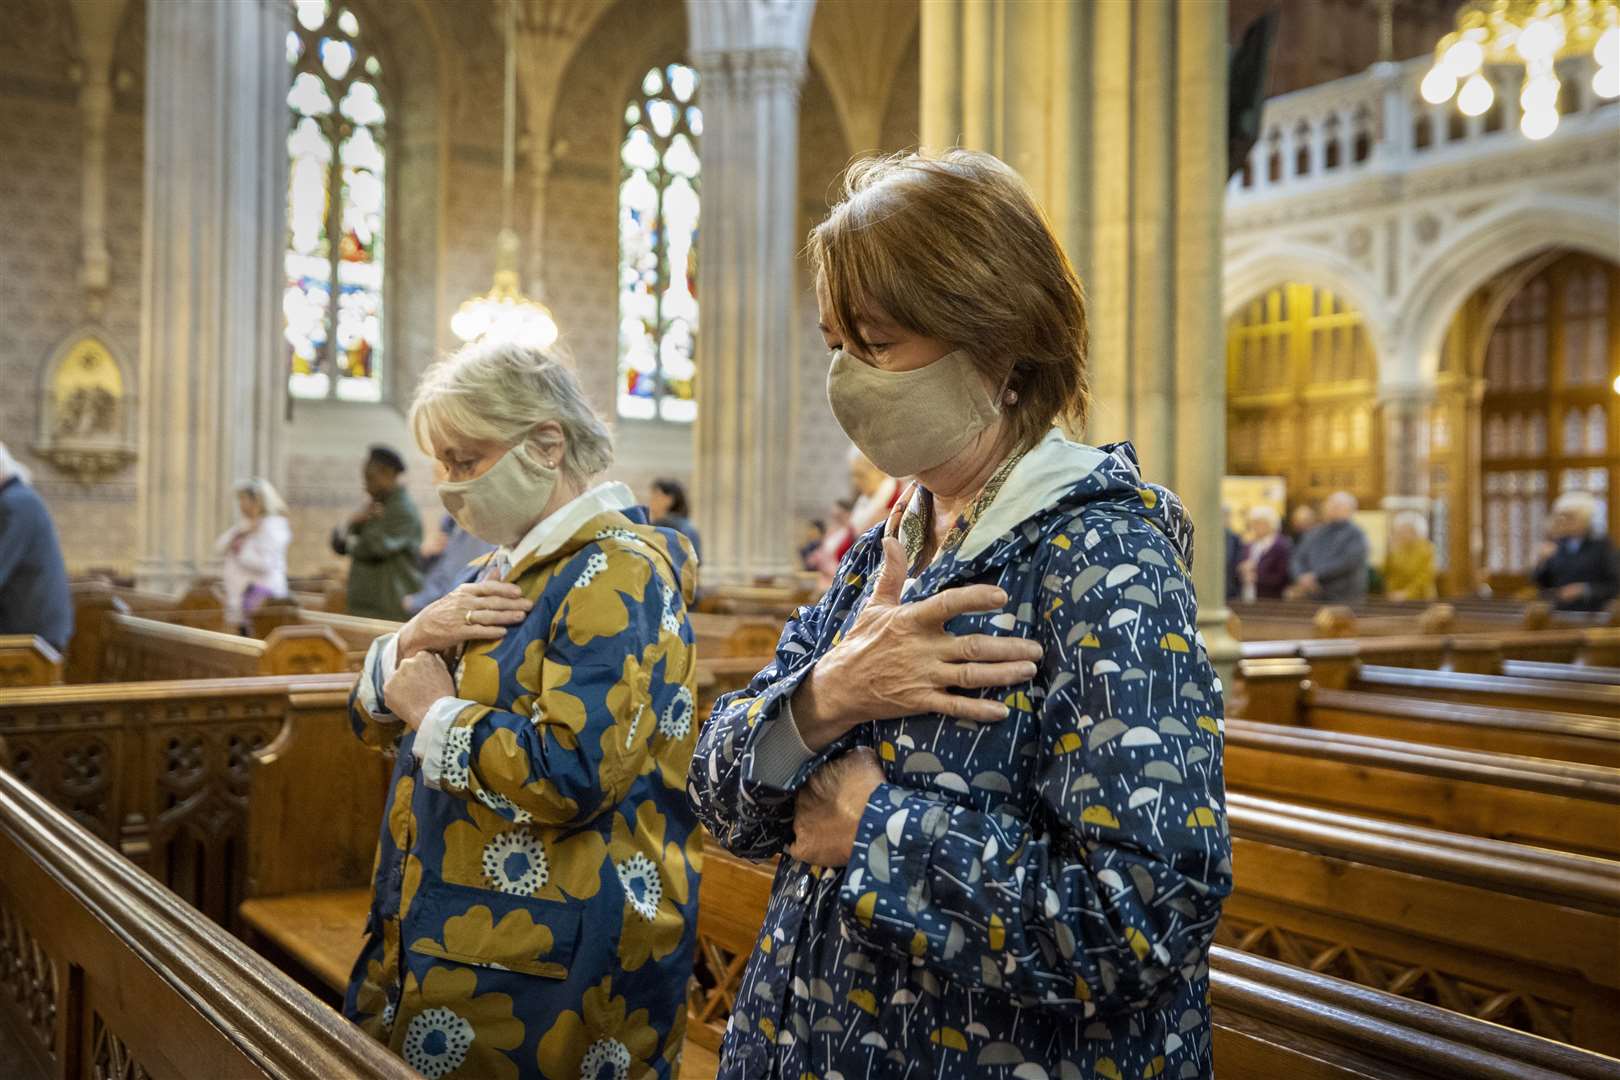 Parishioners wearing face masks bless themselves at the end of mass (Liam McBurney/PA)